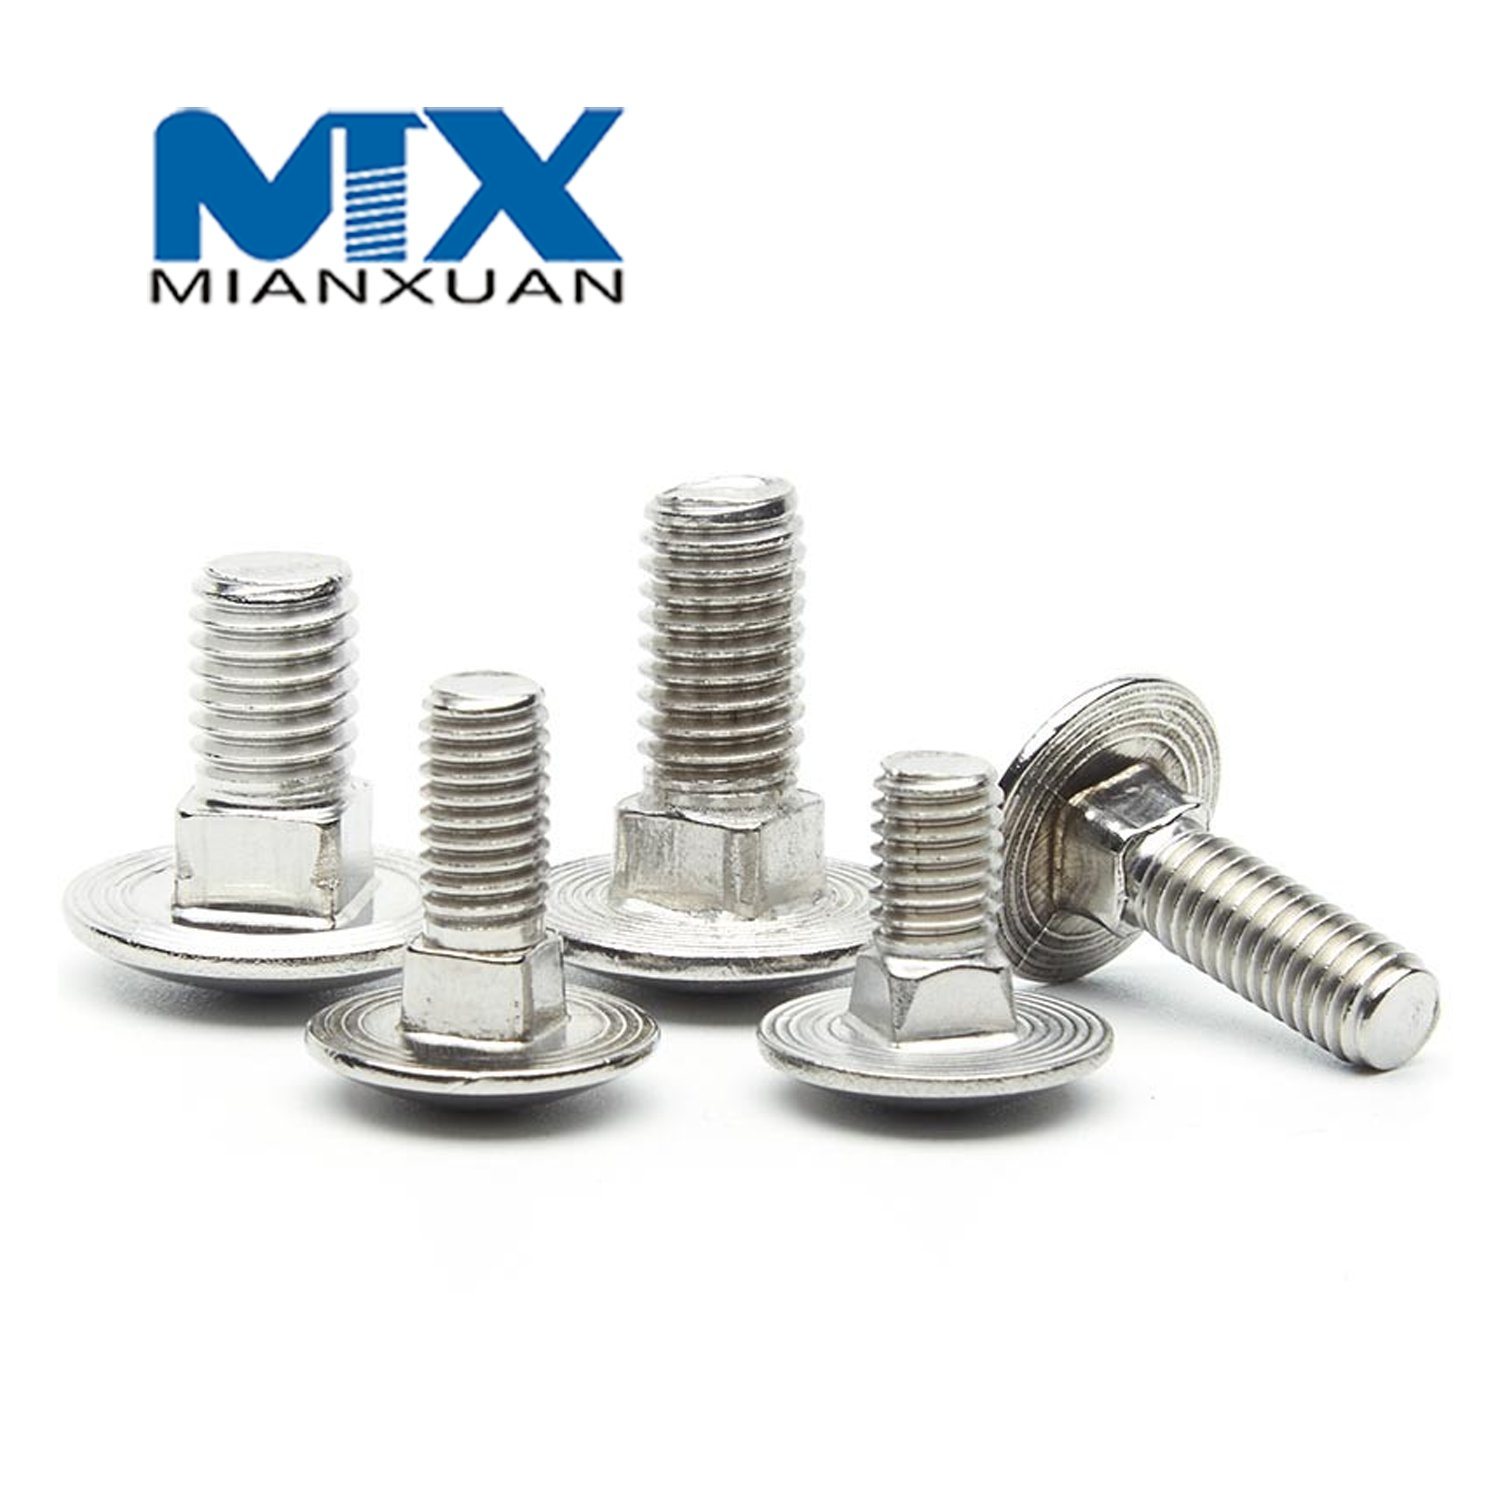 Heavy Duty GB12 Stainless Steel Carriage Bolt for Automotive Applications